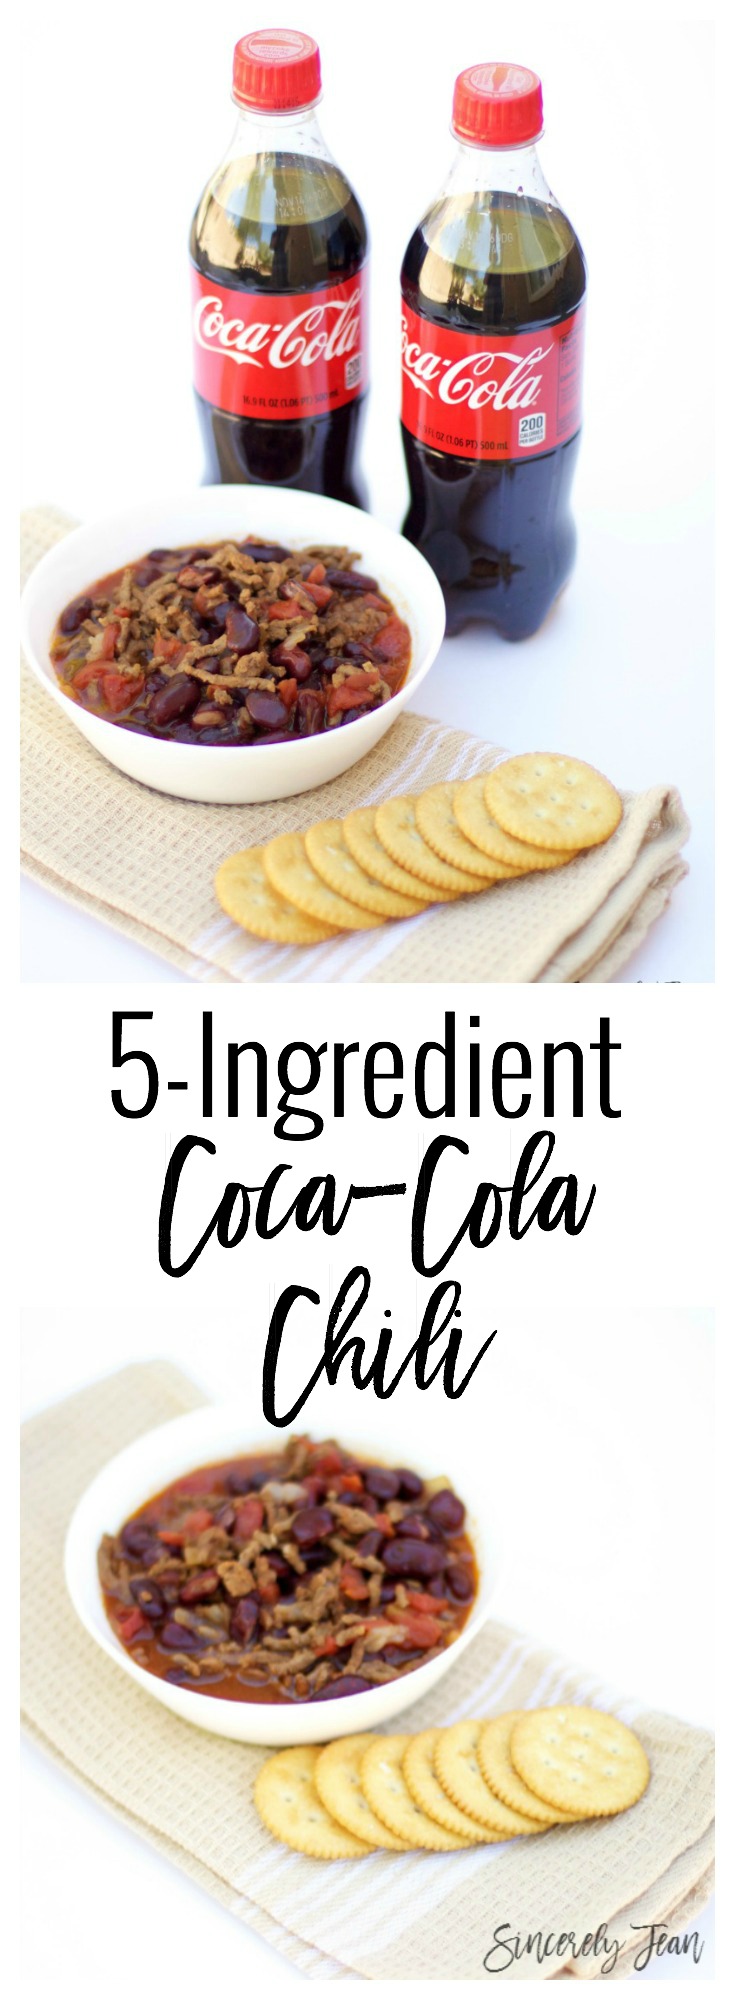 SincerelyJean.com brings you Slow Cooker Coca-Cola Chili, with only five ingredients